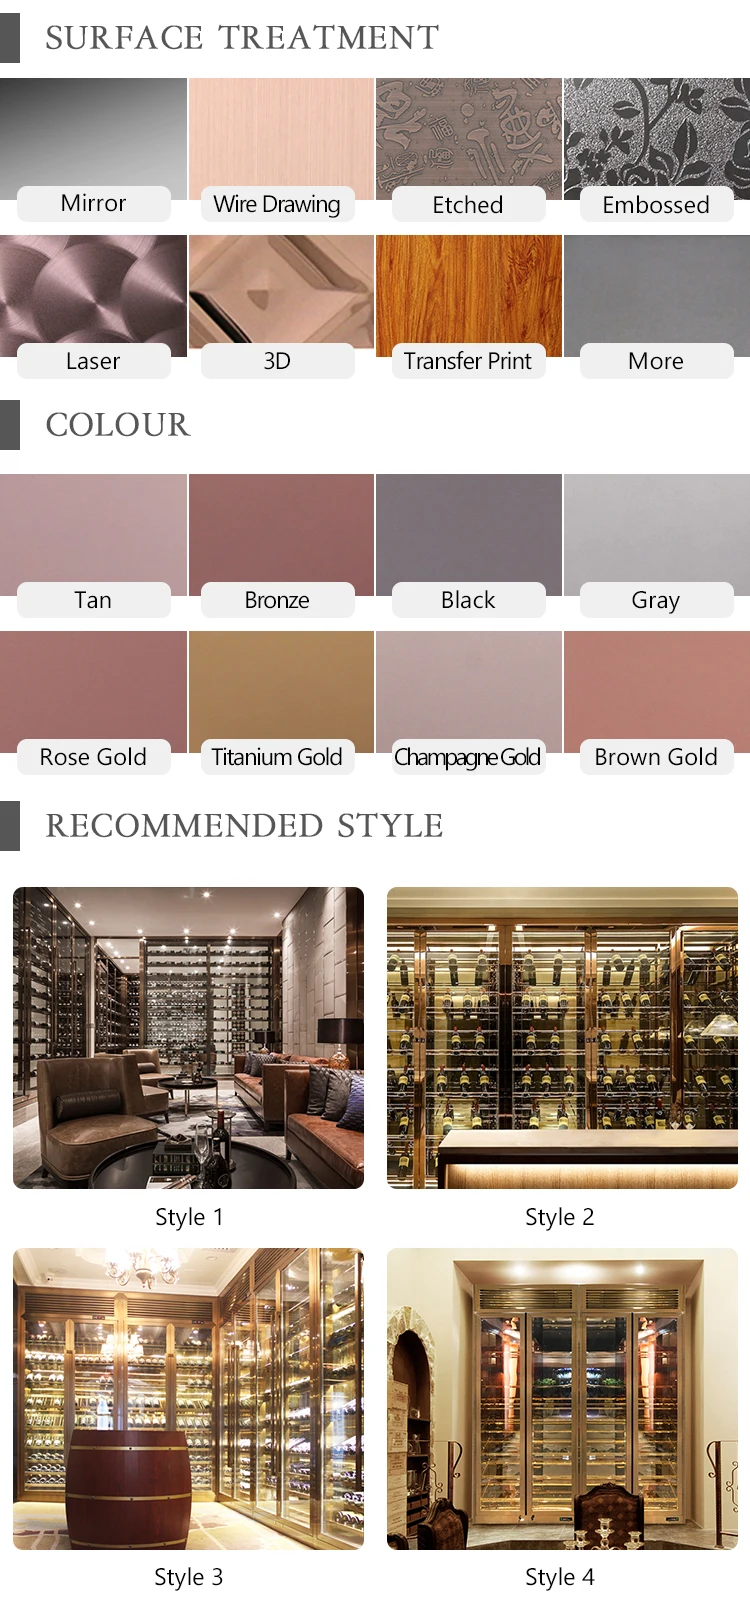 Champagne Color Wine Display Cabinet Stainless Steel Active Wine Refrigerator Electric Modern Furniture 12V Wine cooler